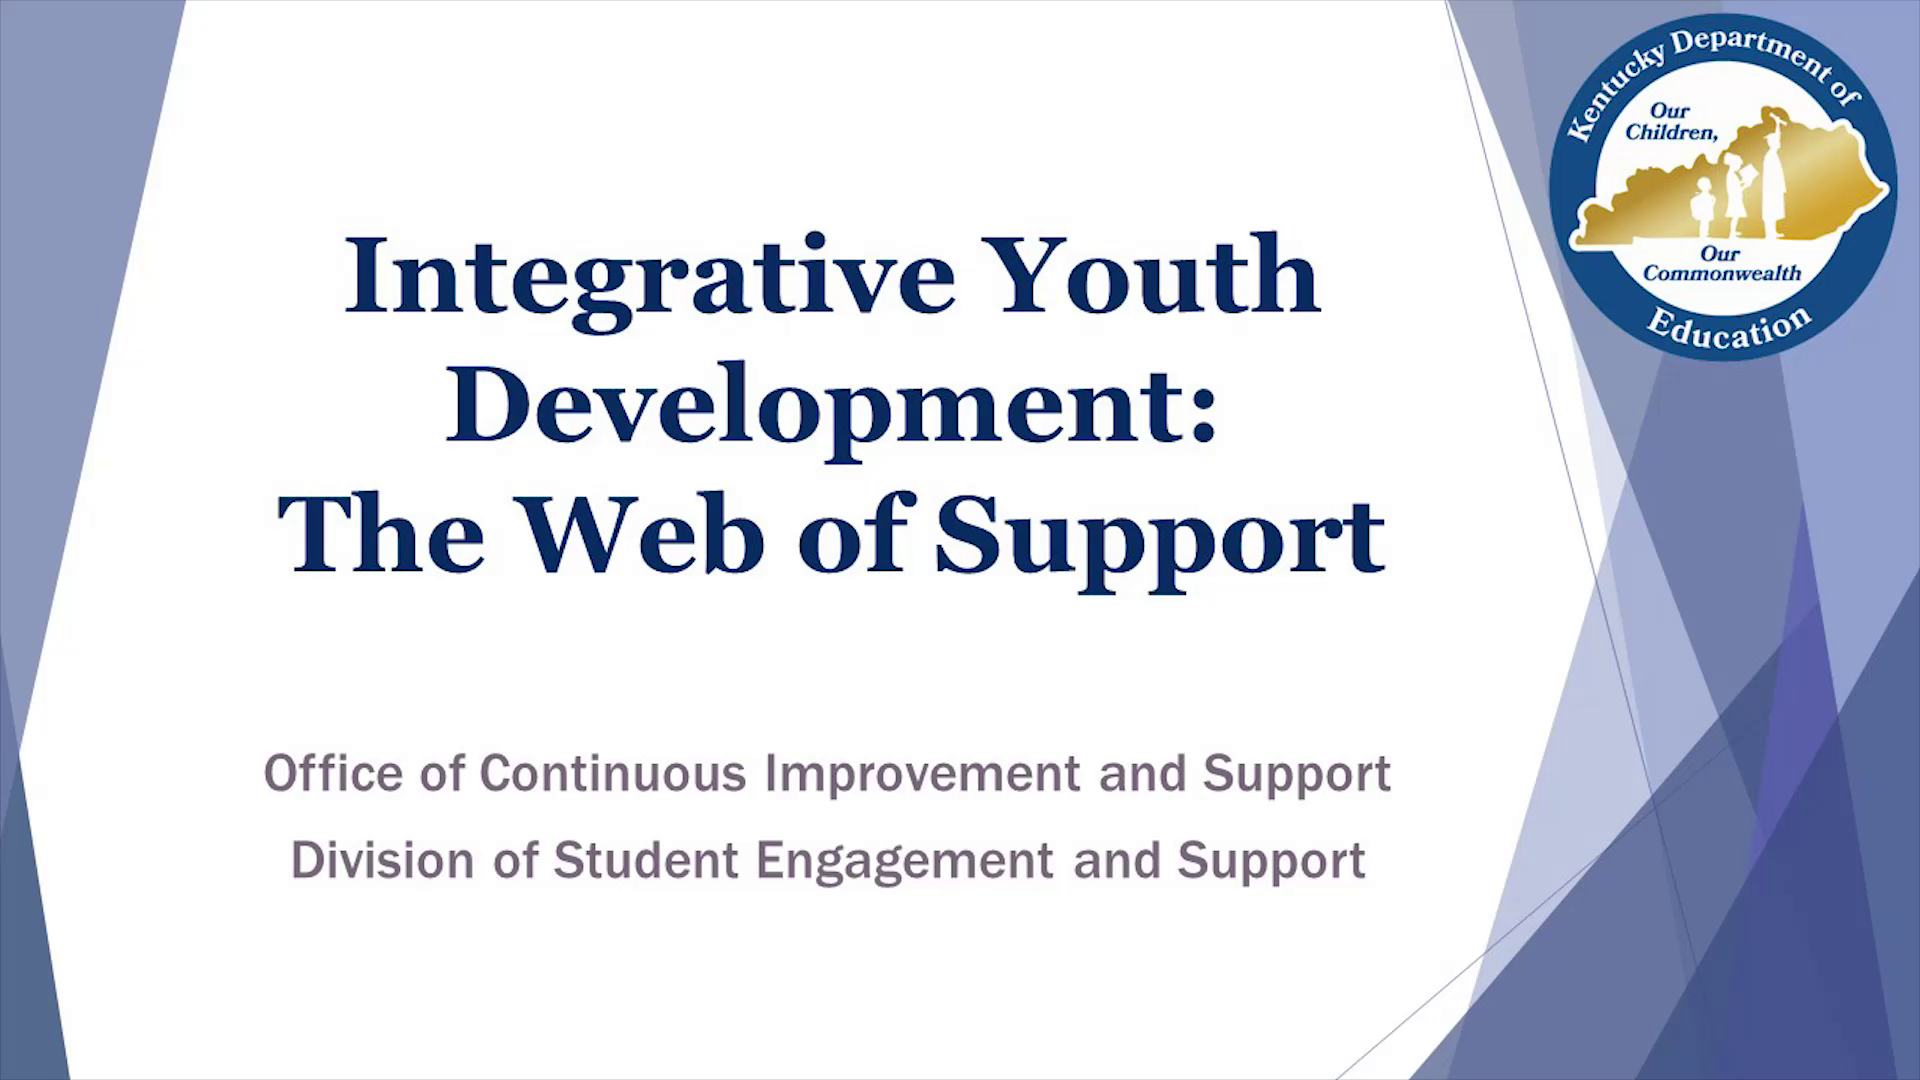 Integrative Youth Development: The Web of Support